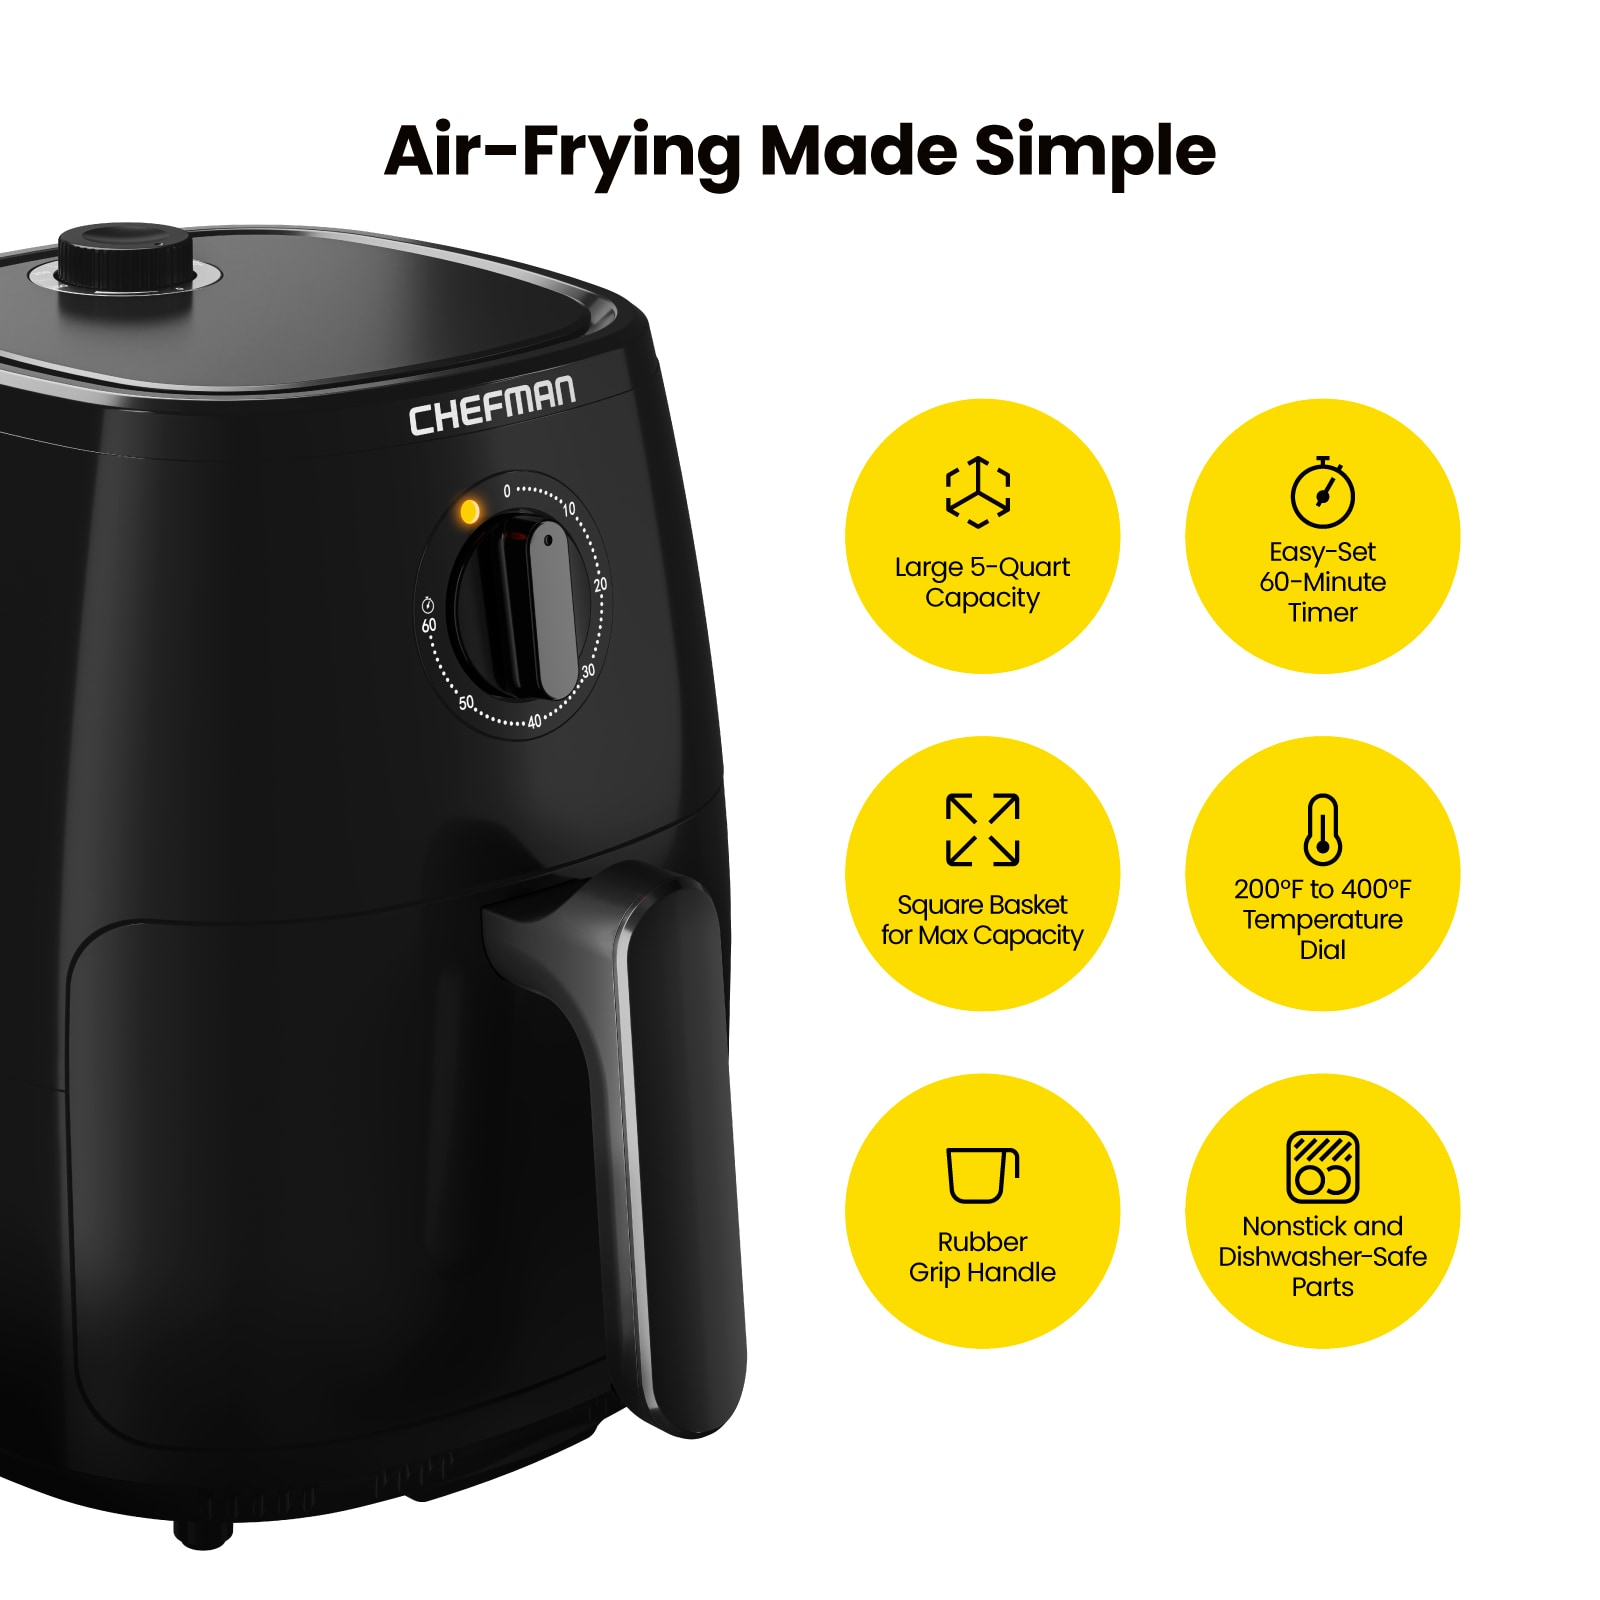 Chefman 5-Quart Black Air Fryer, Oil-less, Non-Stick, cETLus Safety  Listed, 1500W, Perfect for Crispy, Healthy Cooking, Large Capacity for  Family Meals